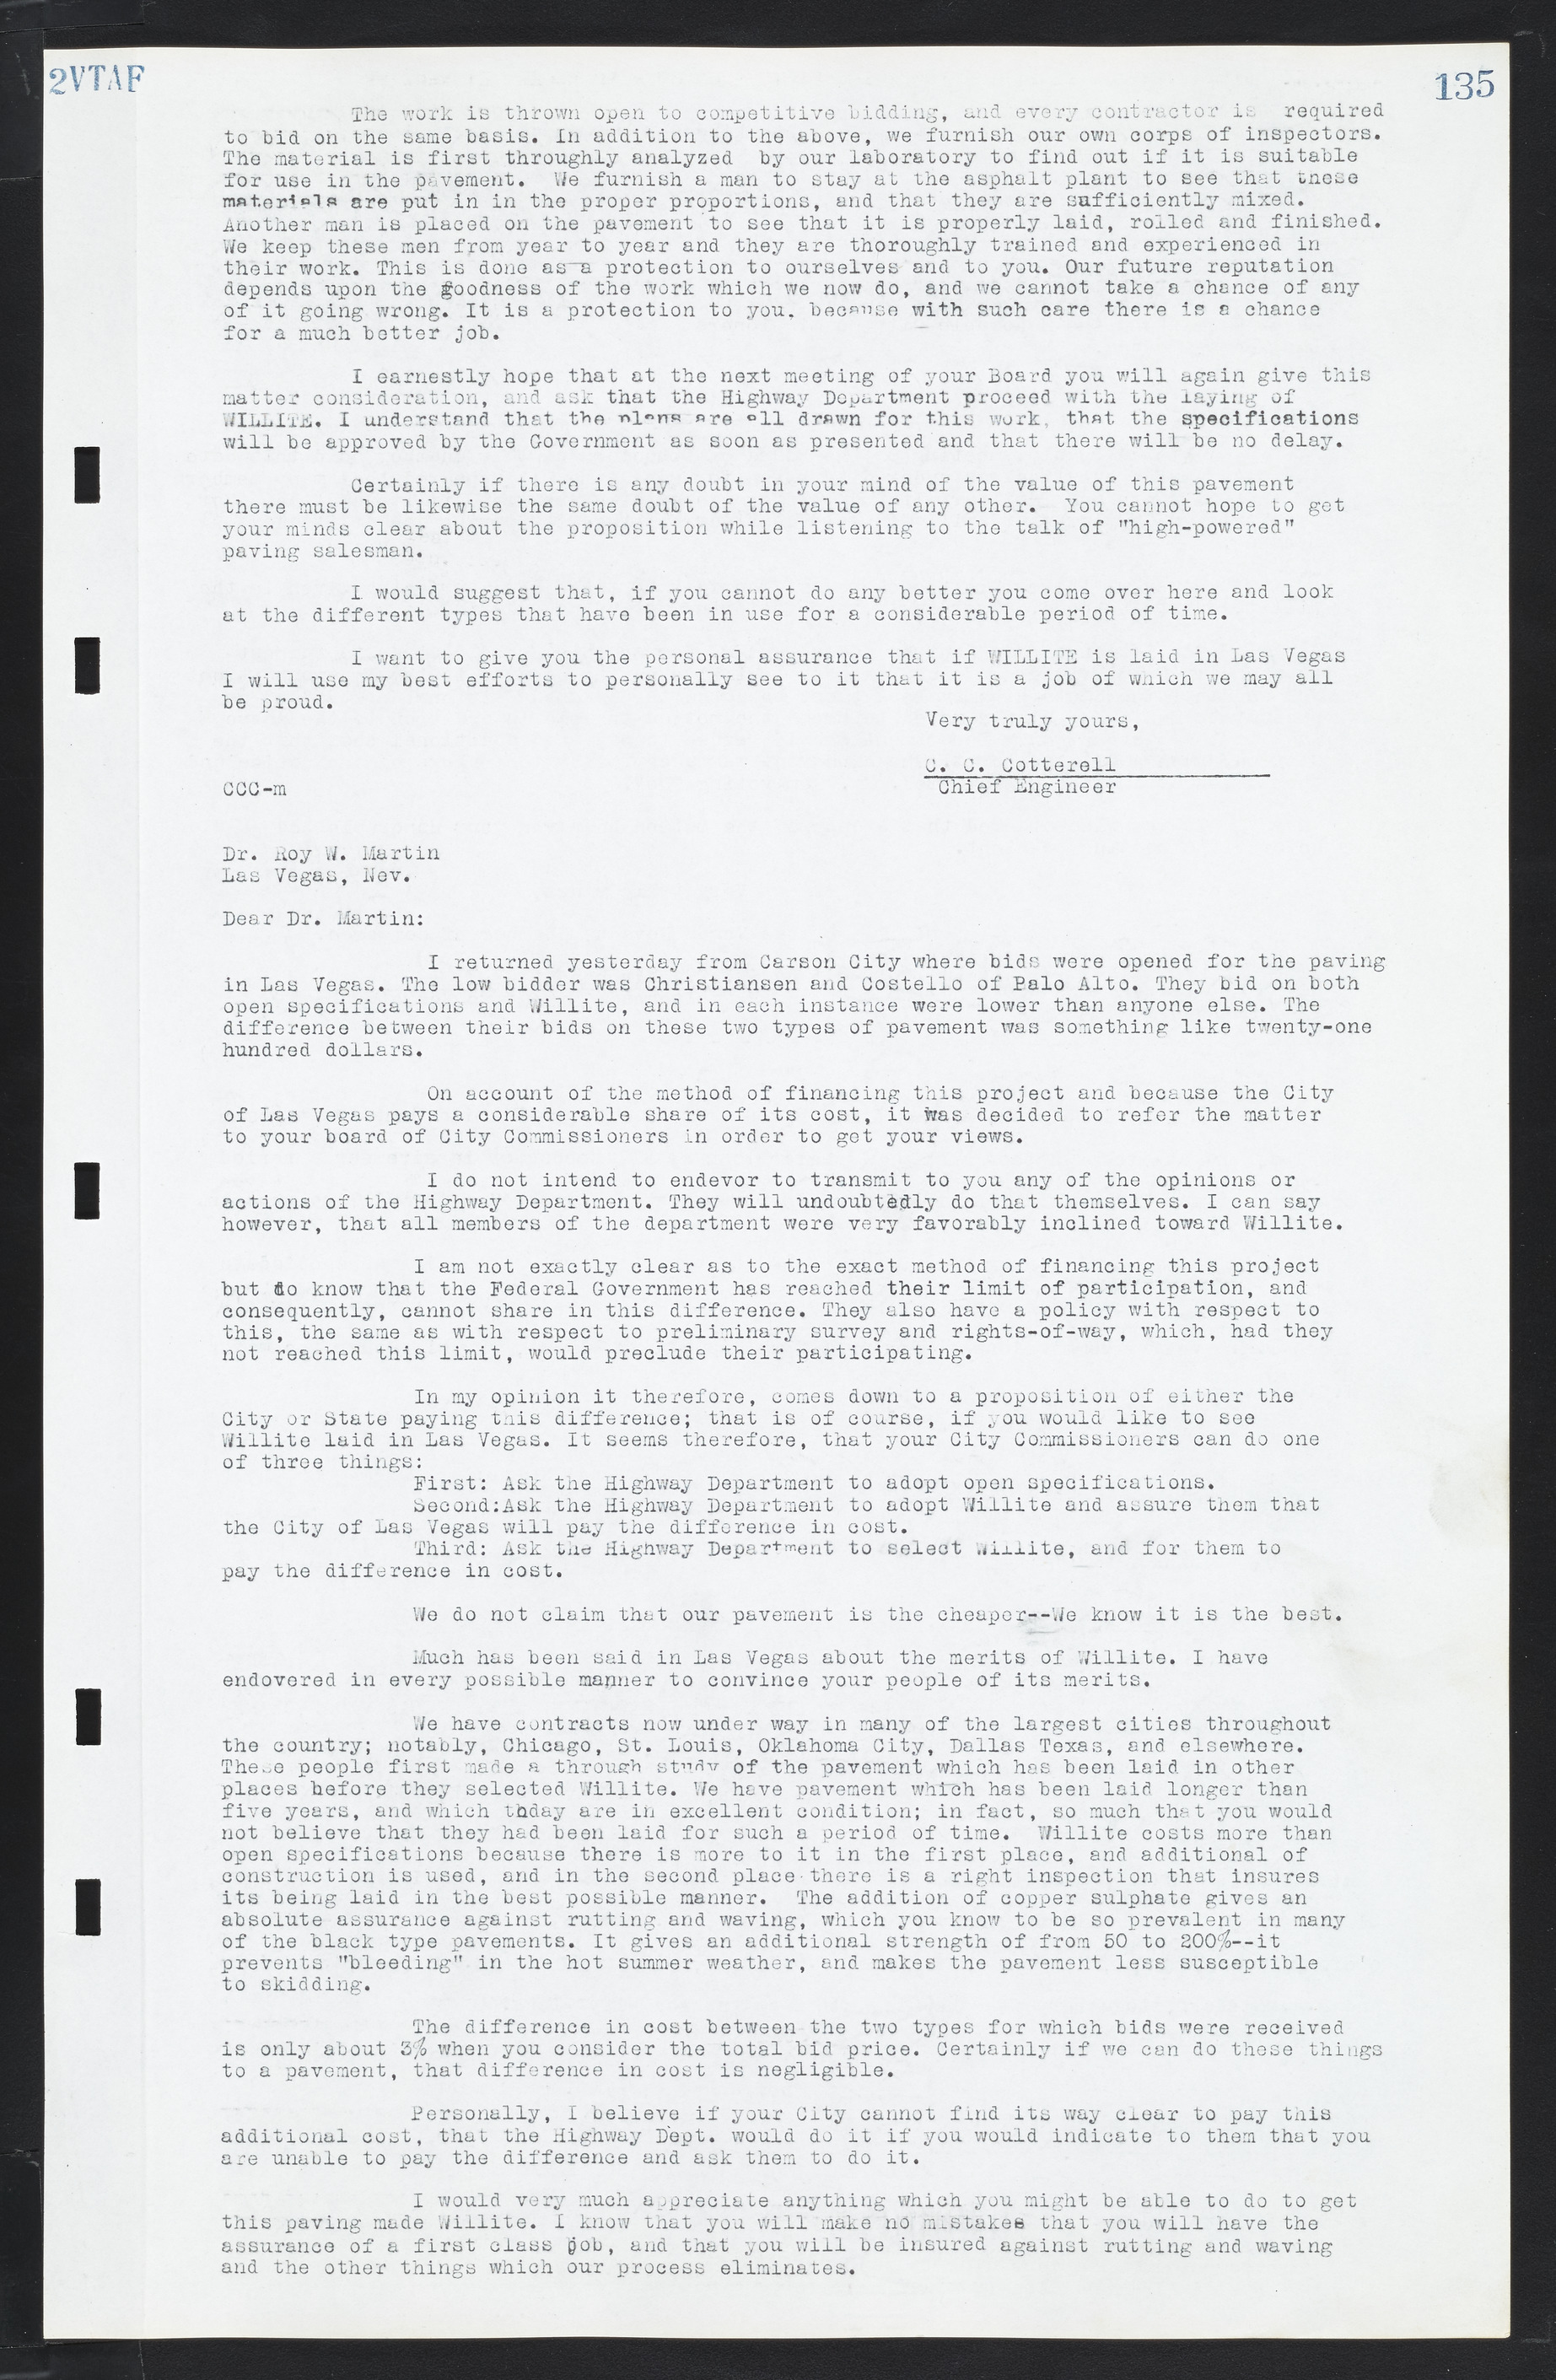 Las Vegas City Commission Minutes, March 1, 1922 to May 10, 1929, lvc000002-142